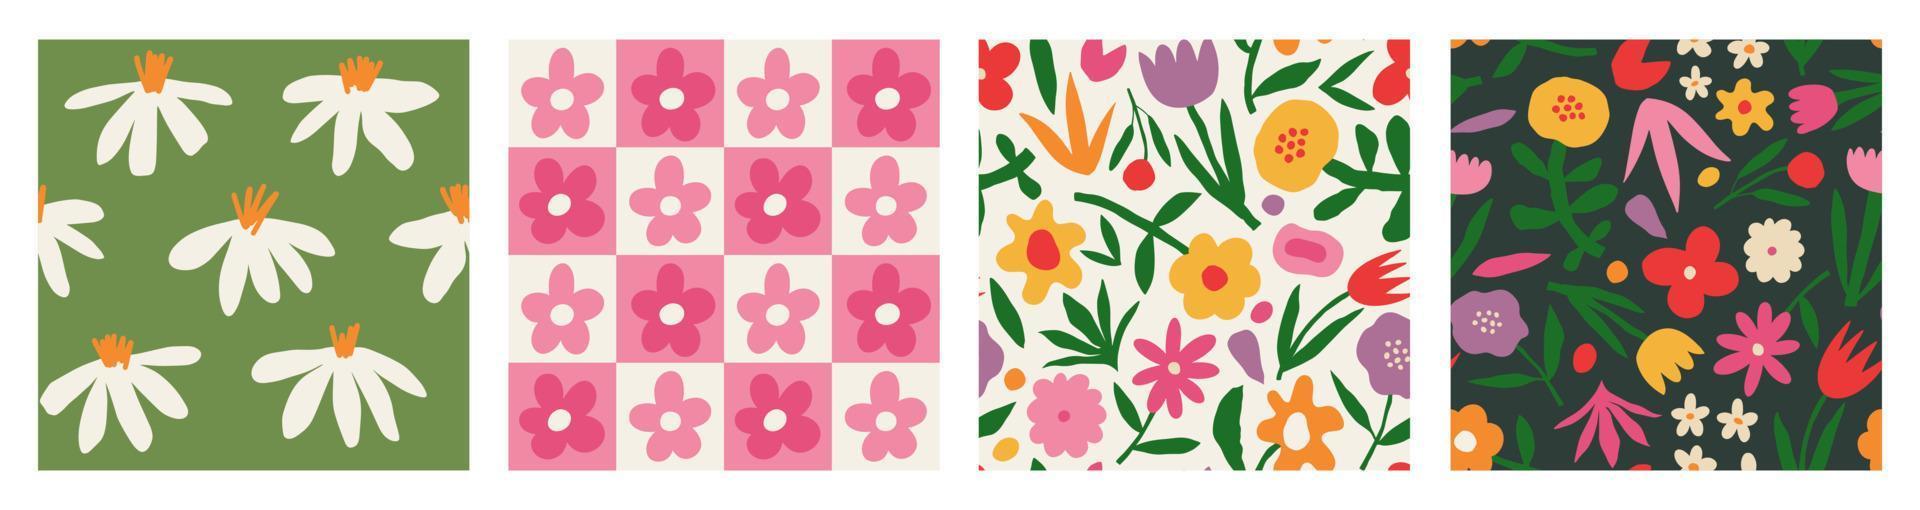 Set Aesthetic Contemporary printable seamless pattern with retro groovy flowers. Decorative Naive 60's, 70's style Vintage boho background in minimalist mid century style for fabric, wallpaper vector